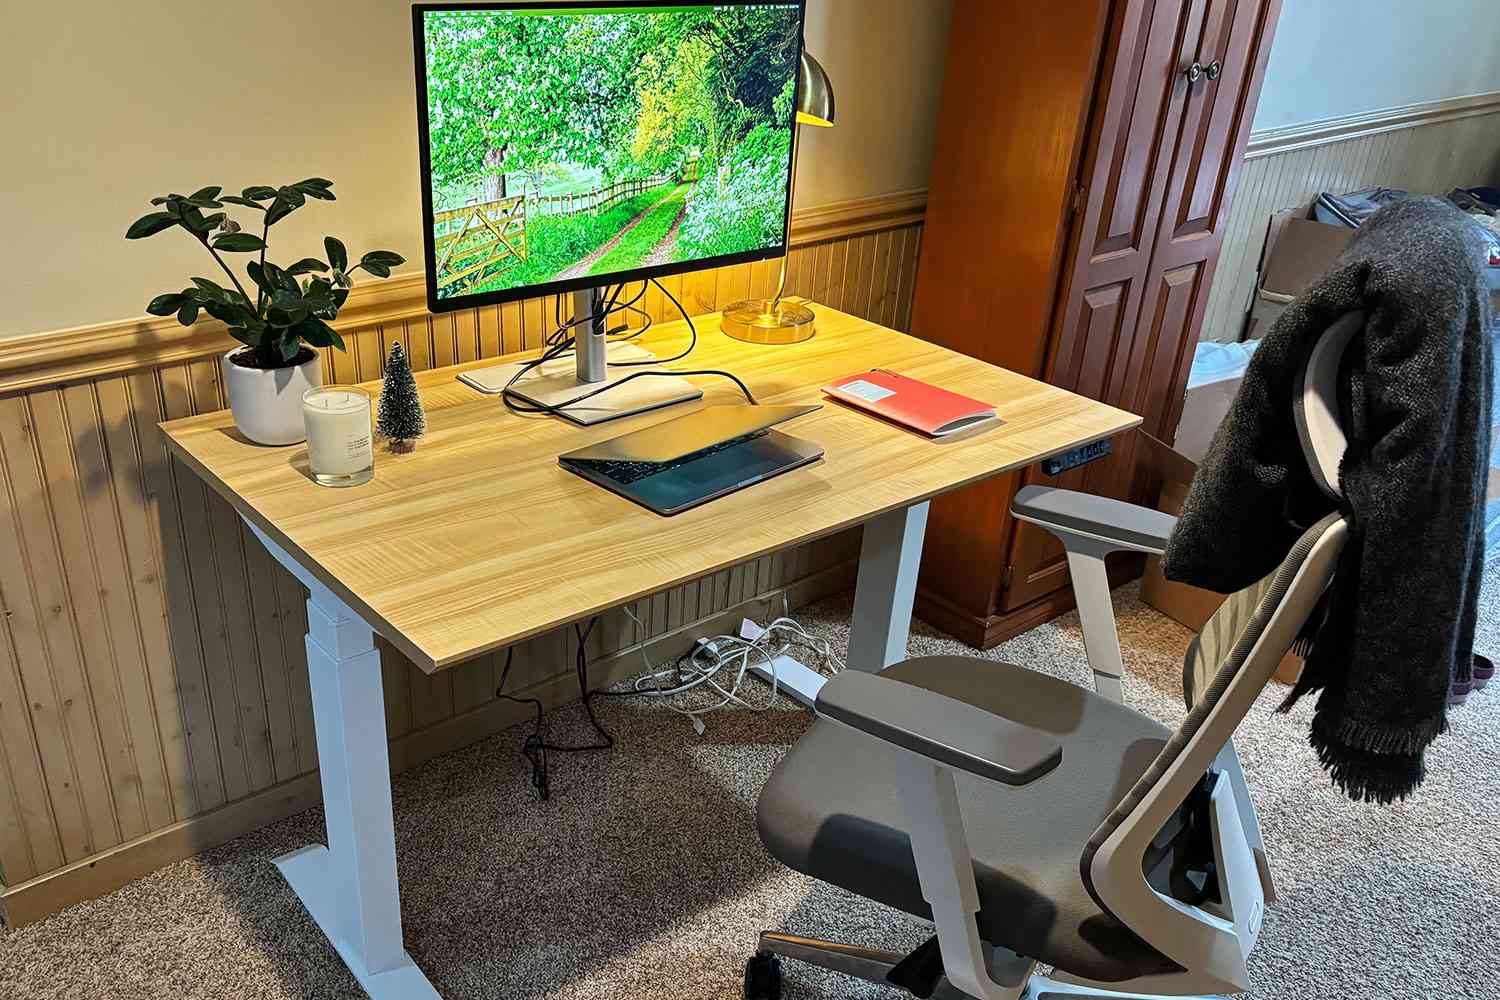 The Branch Standing Desk set up for use in person's home with desktop, laptop, chair, notebook and decor